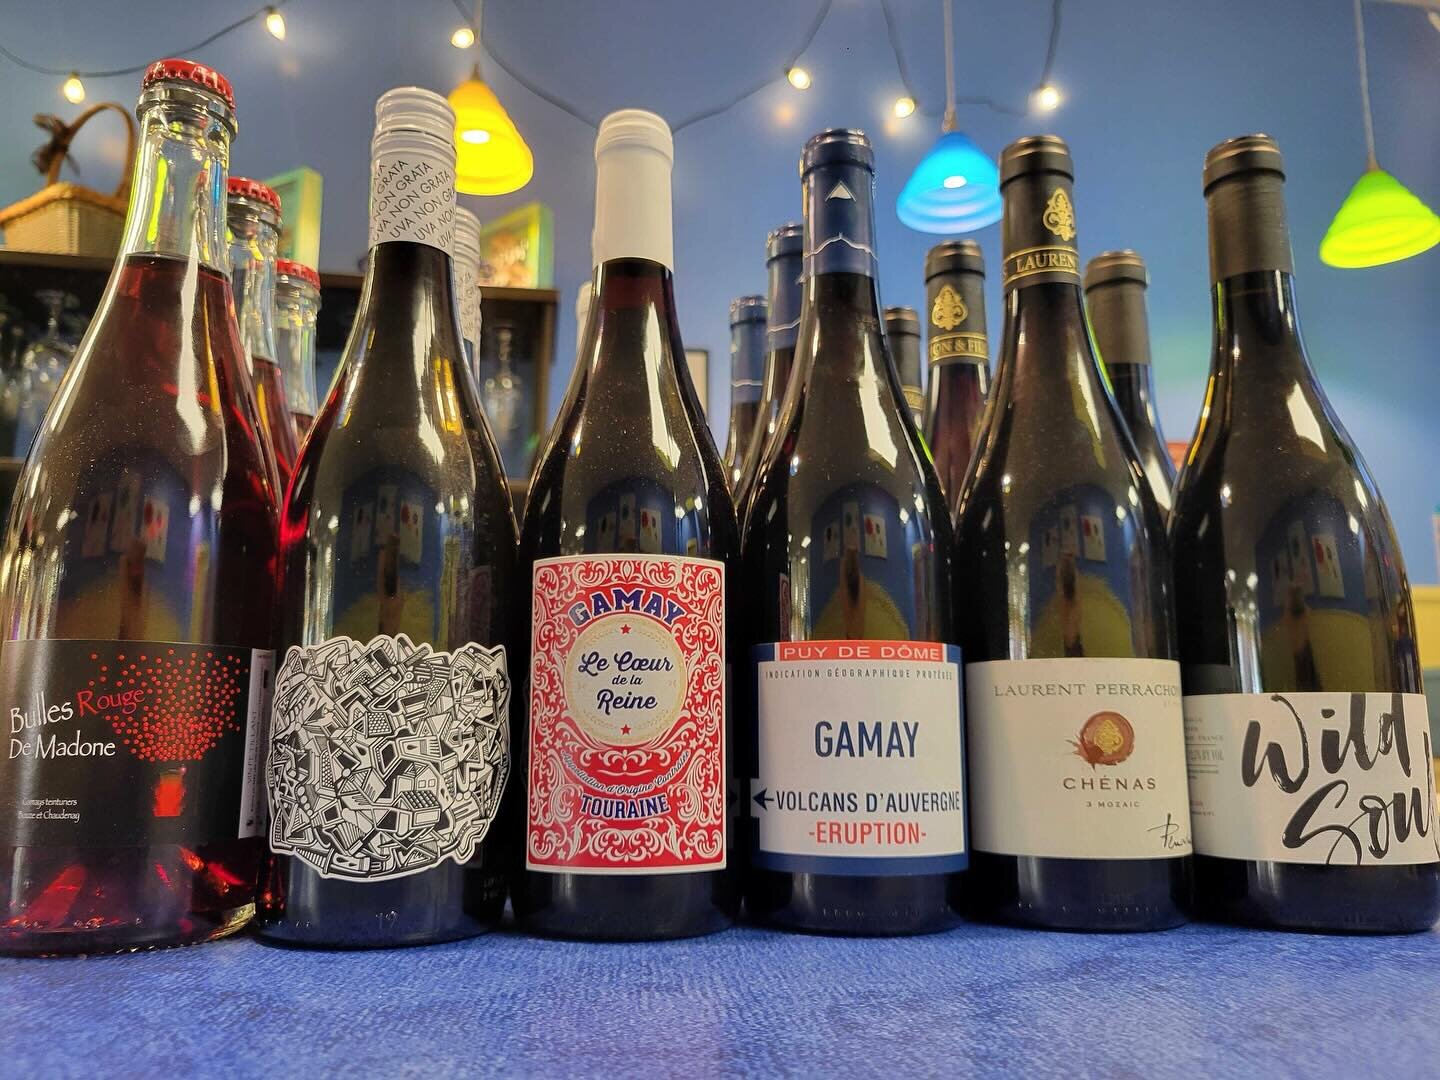 &ldquo;What is Gamay?&rdquo; 

Gamay is the grape variety most closely associated with Beaujolais, the wine region south of Burgundy. There, Gamay is made into red wine that ranges from bright and fruit-forward to surprisingly age-worthy. No matter w